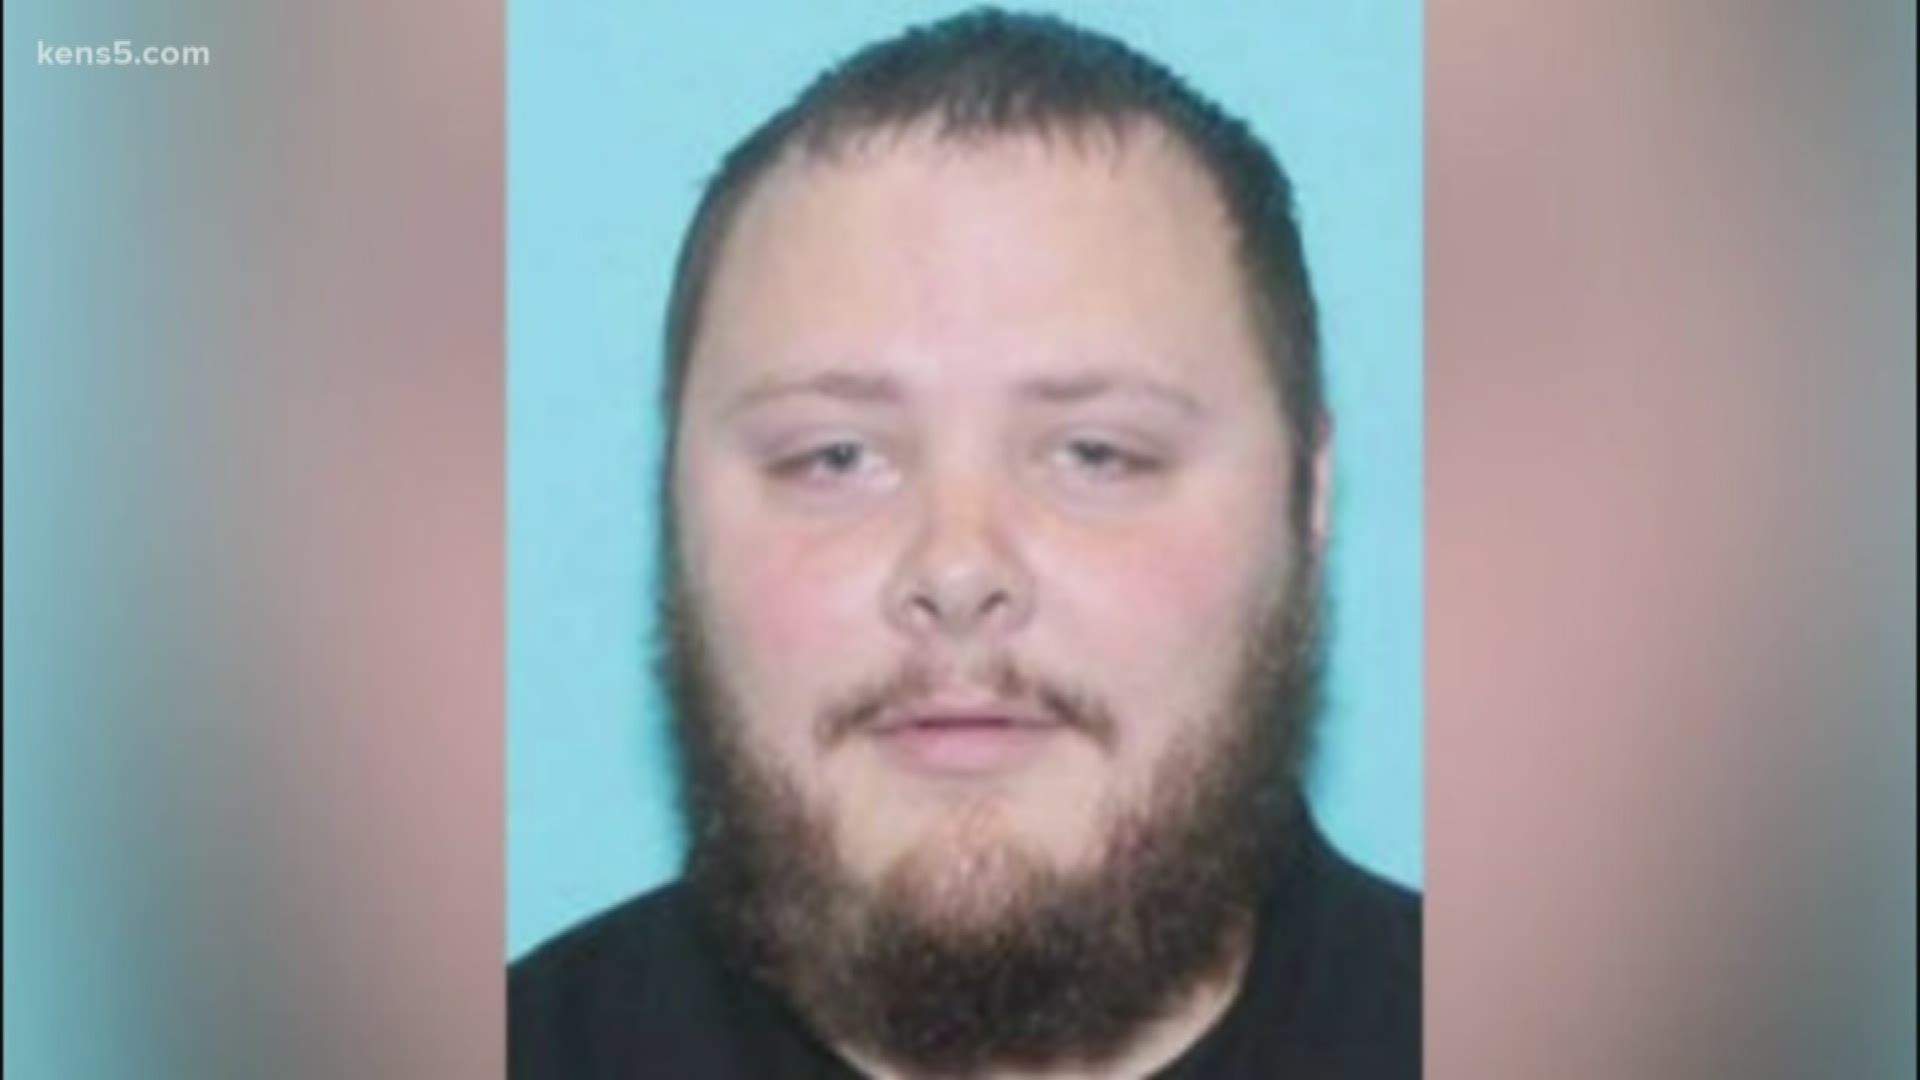 The man who opened fire on a small church congregation in Sutherland Springs Texas has been identified as Devin Kelley, 26, of New Braunfels.